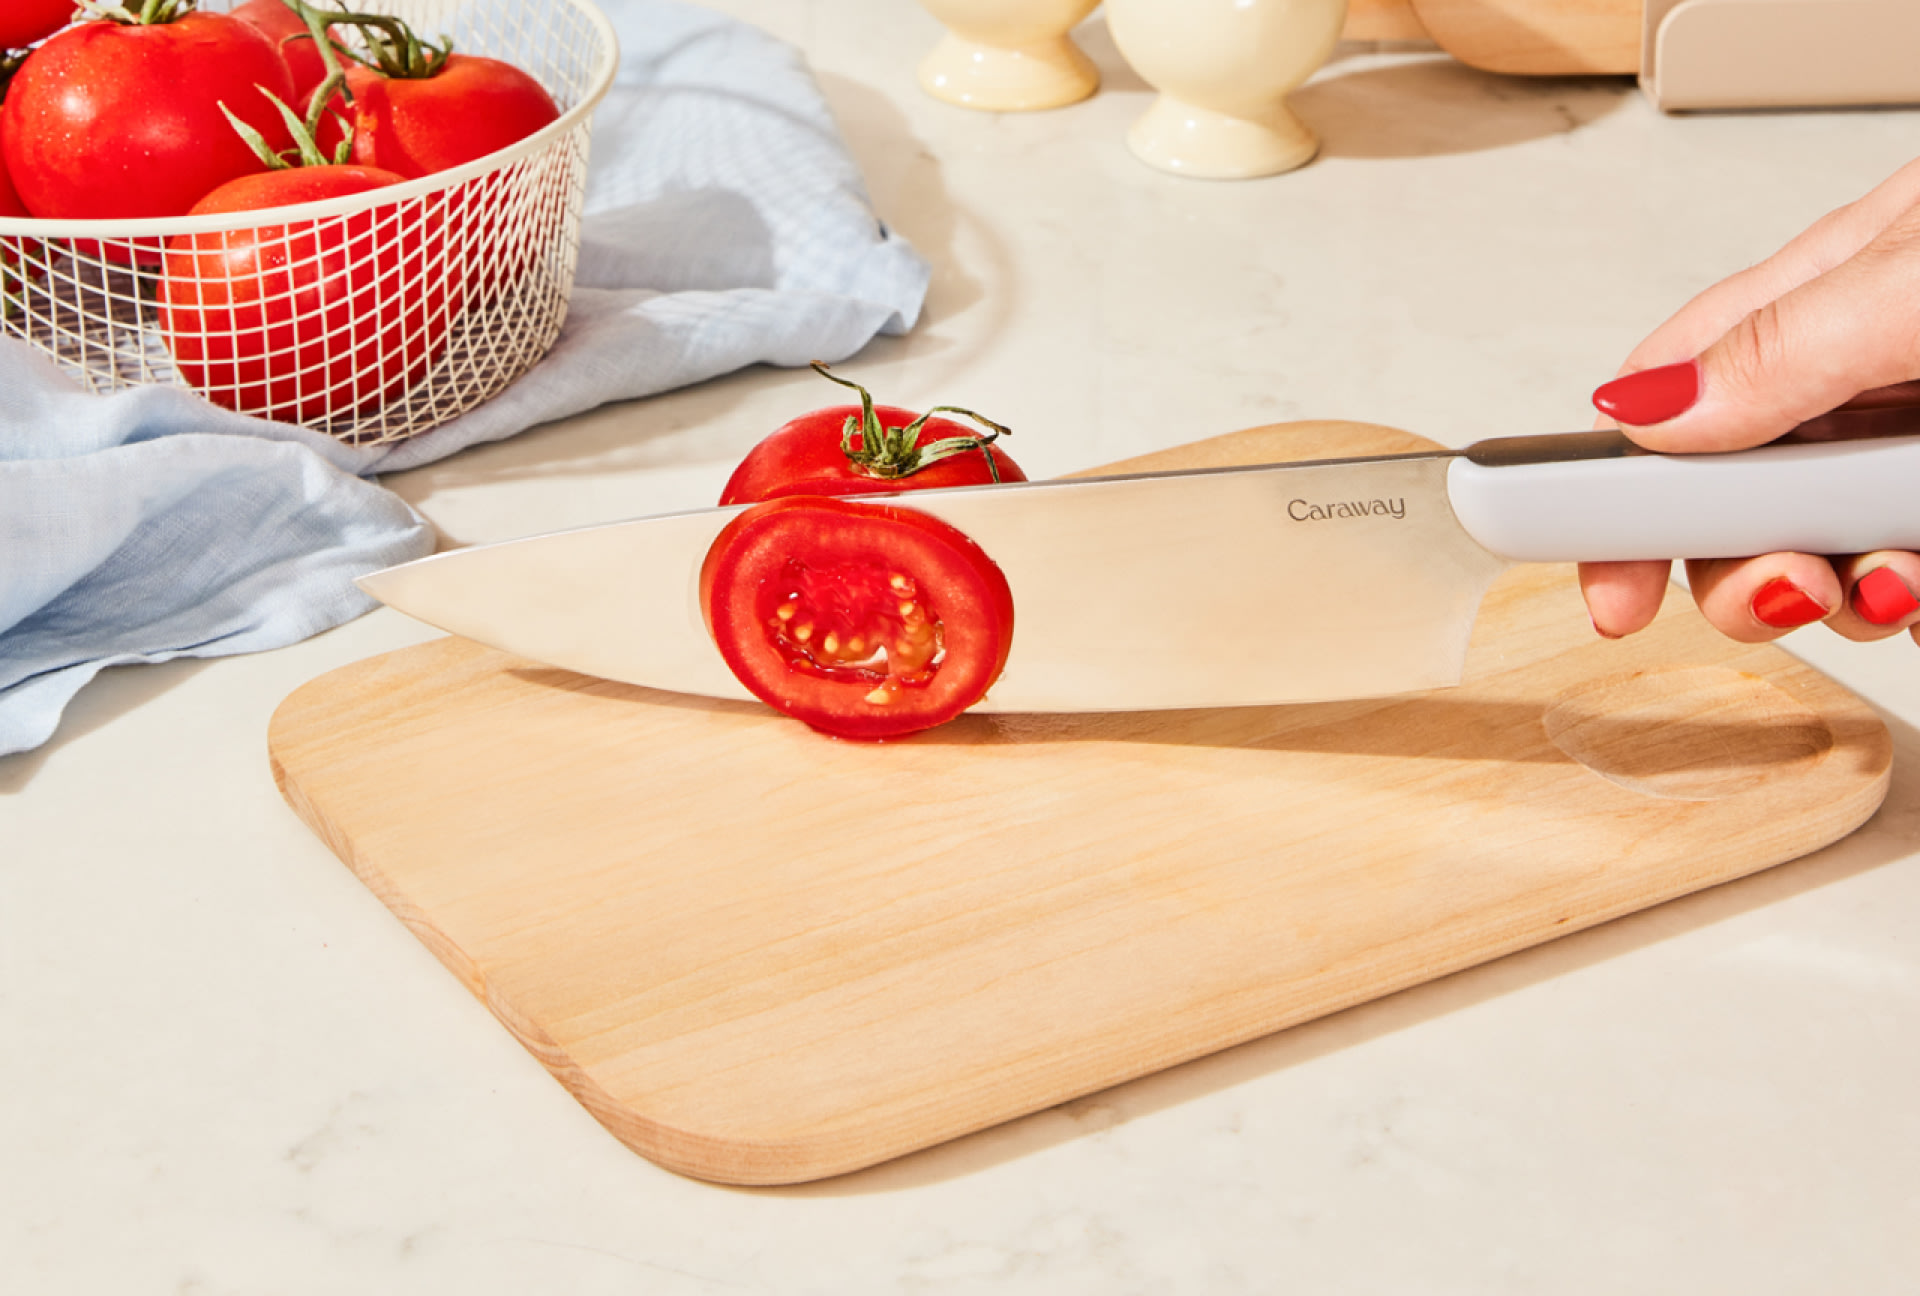 Caraway Releases a Colorful Prep Set to Beautify Your Kitchen